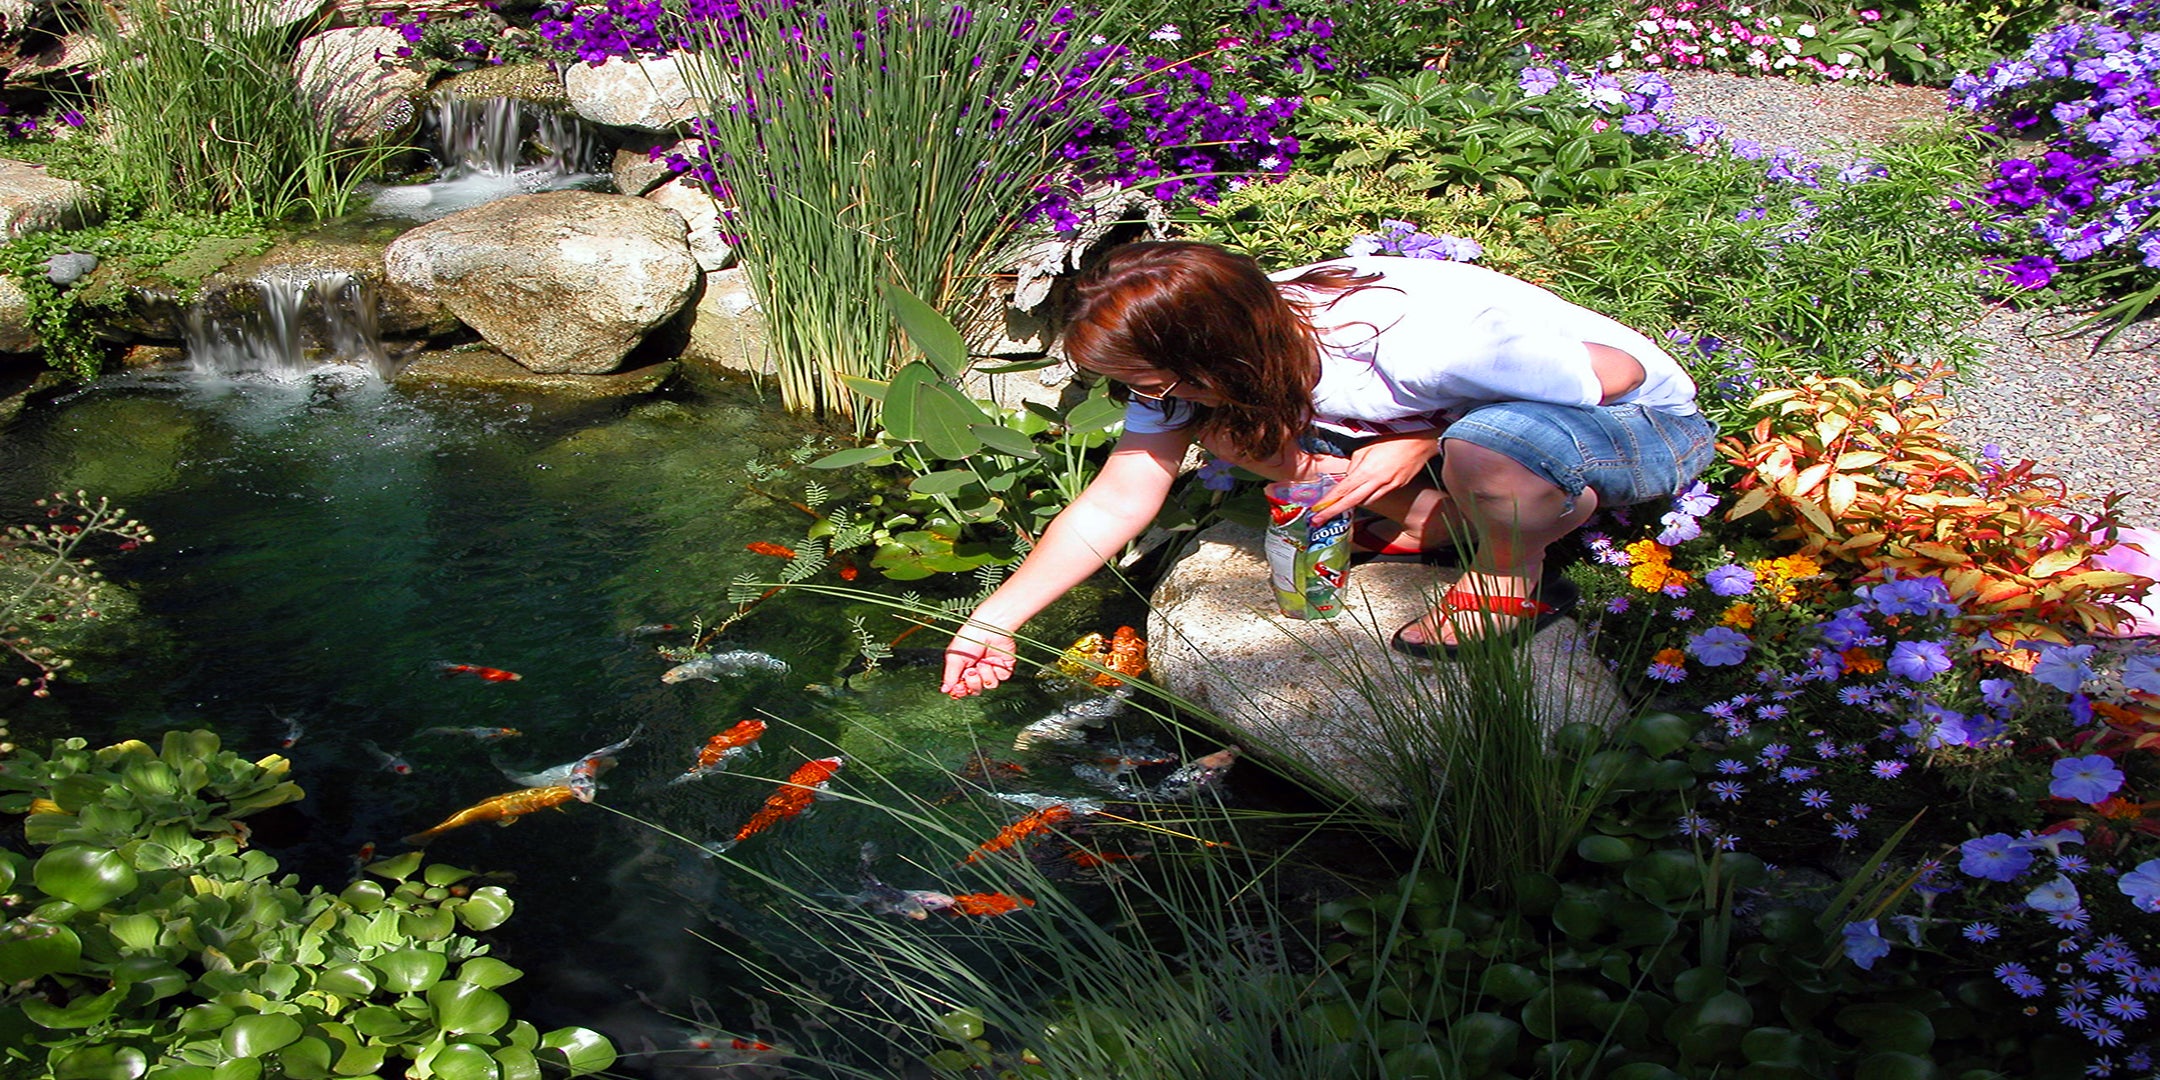 Beautiful water garden fish pond with two step waterfalls and a girl hand feeding koi